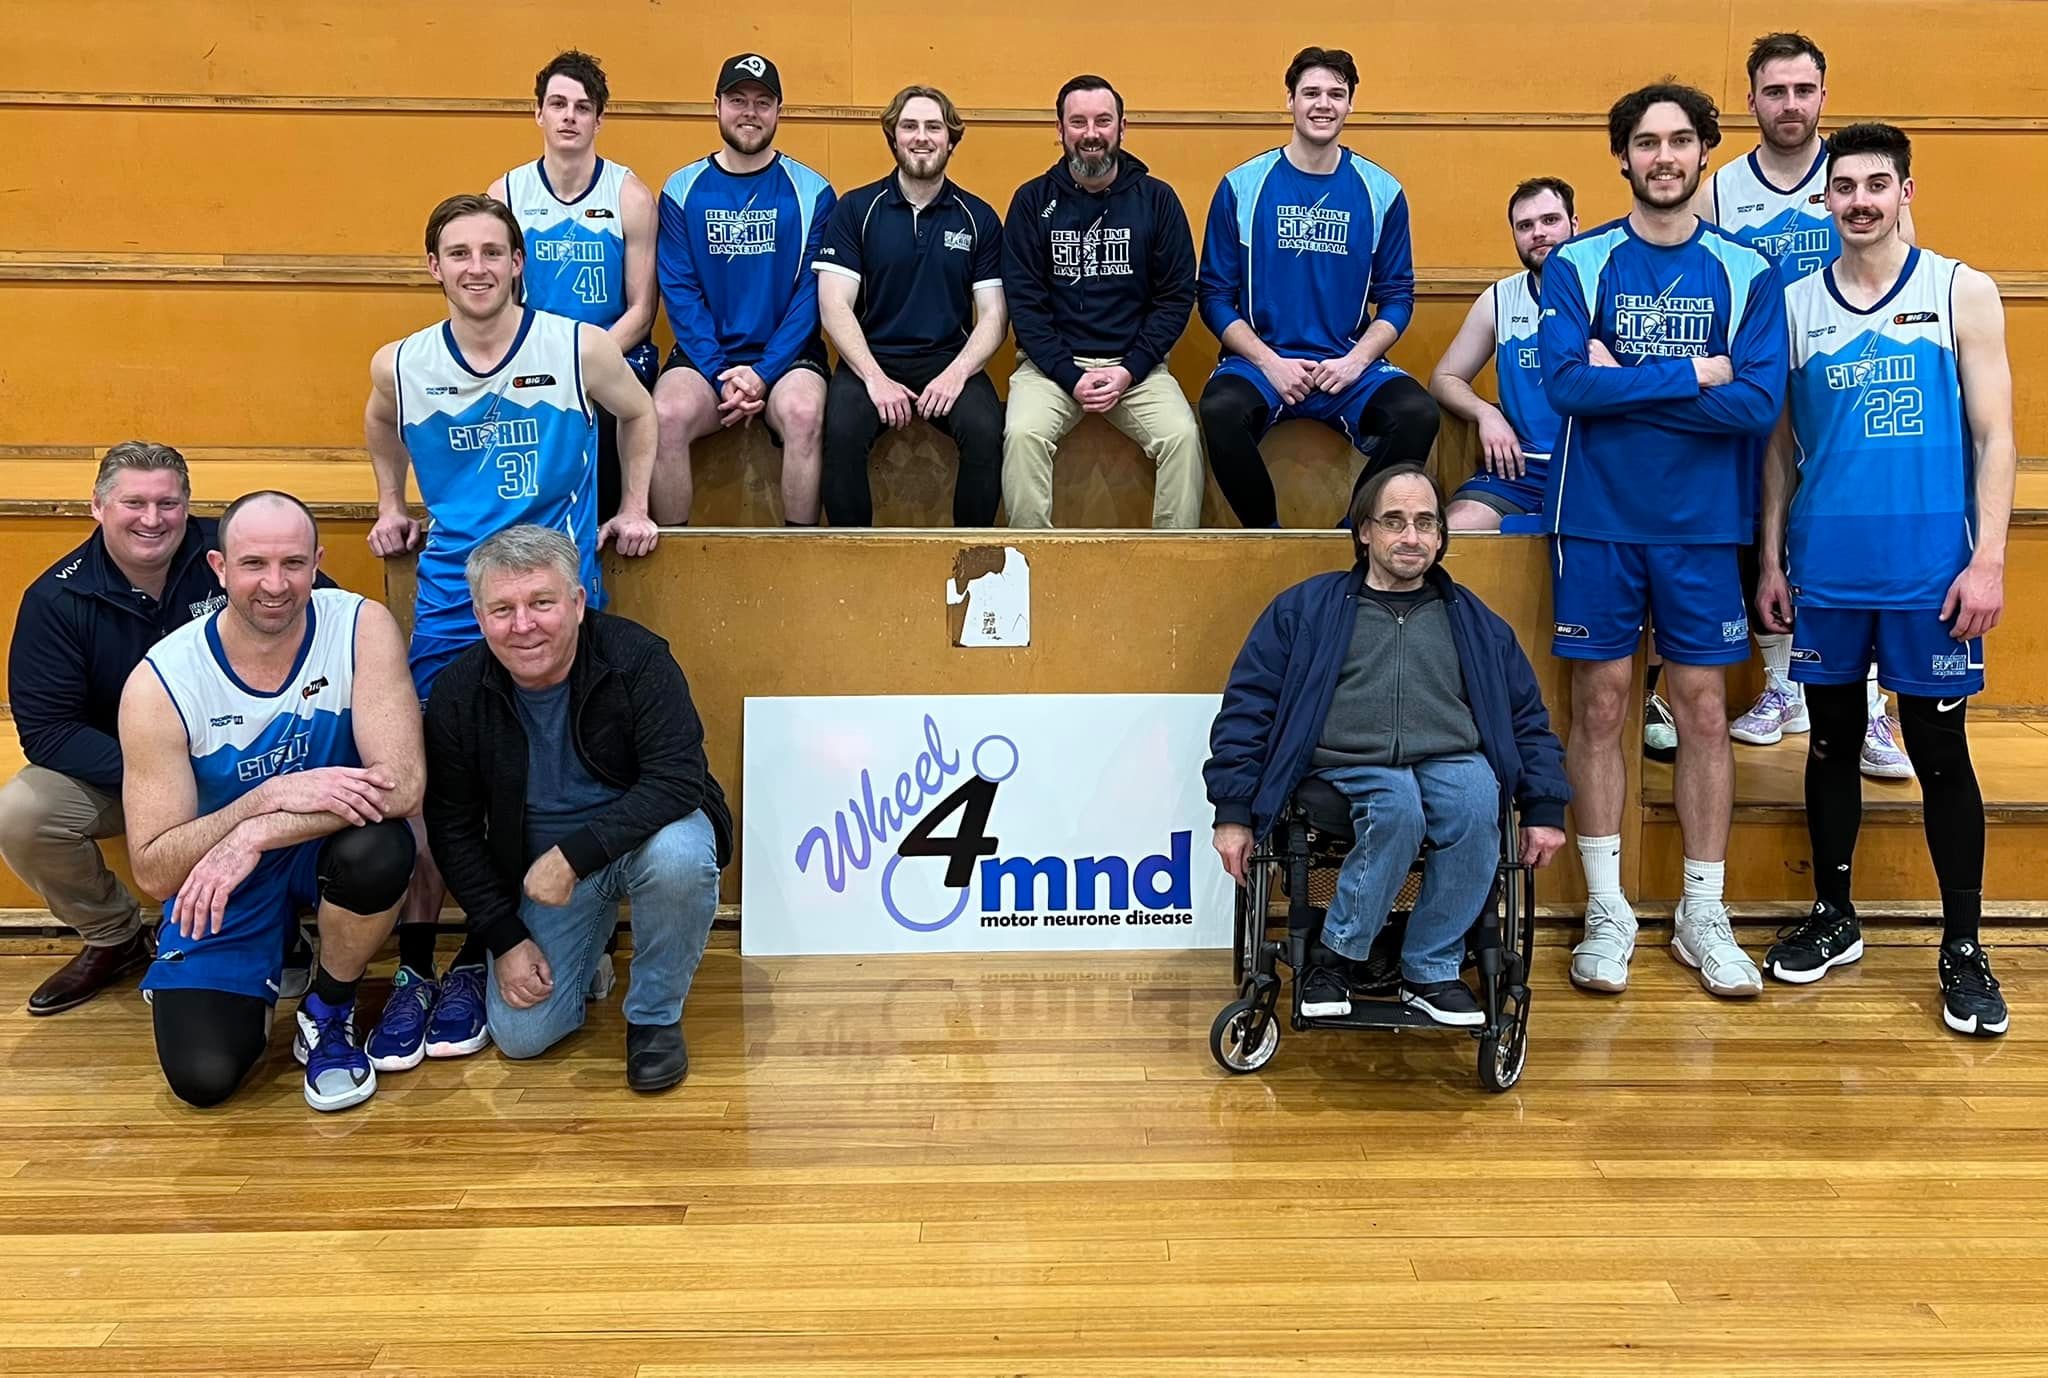 Supporting those with MND